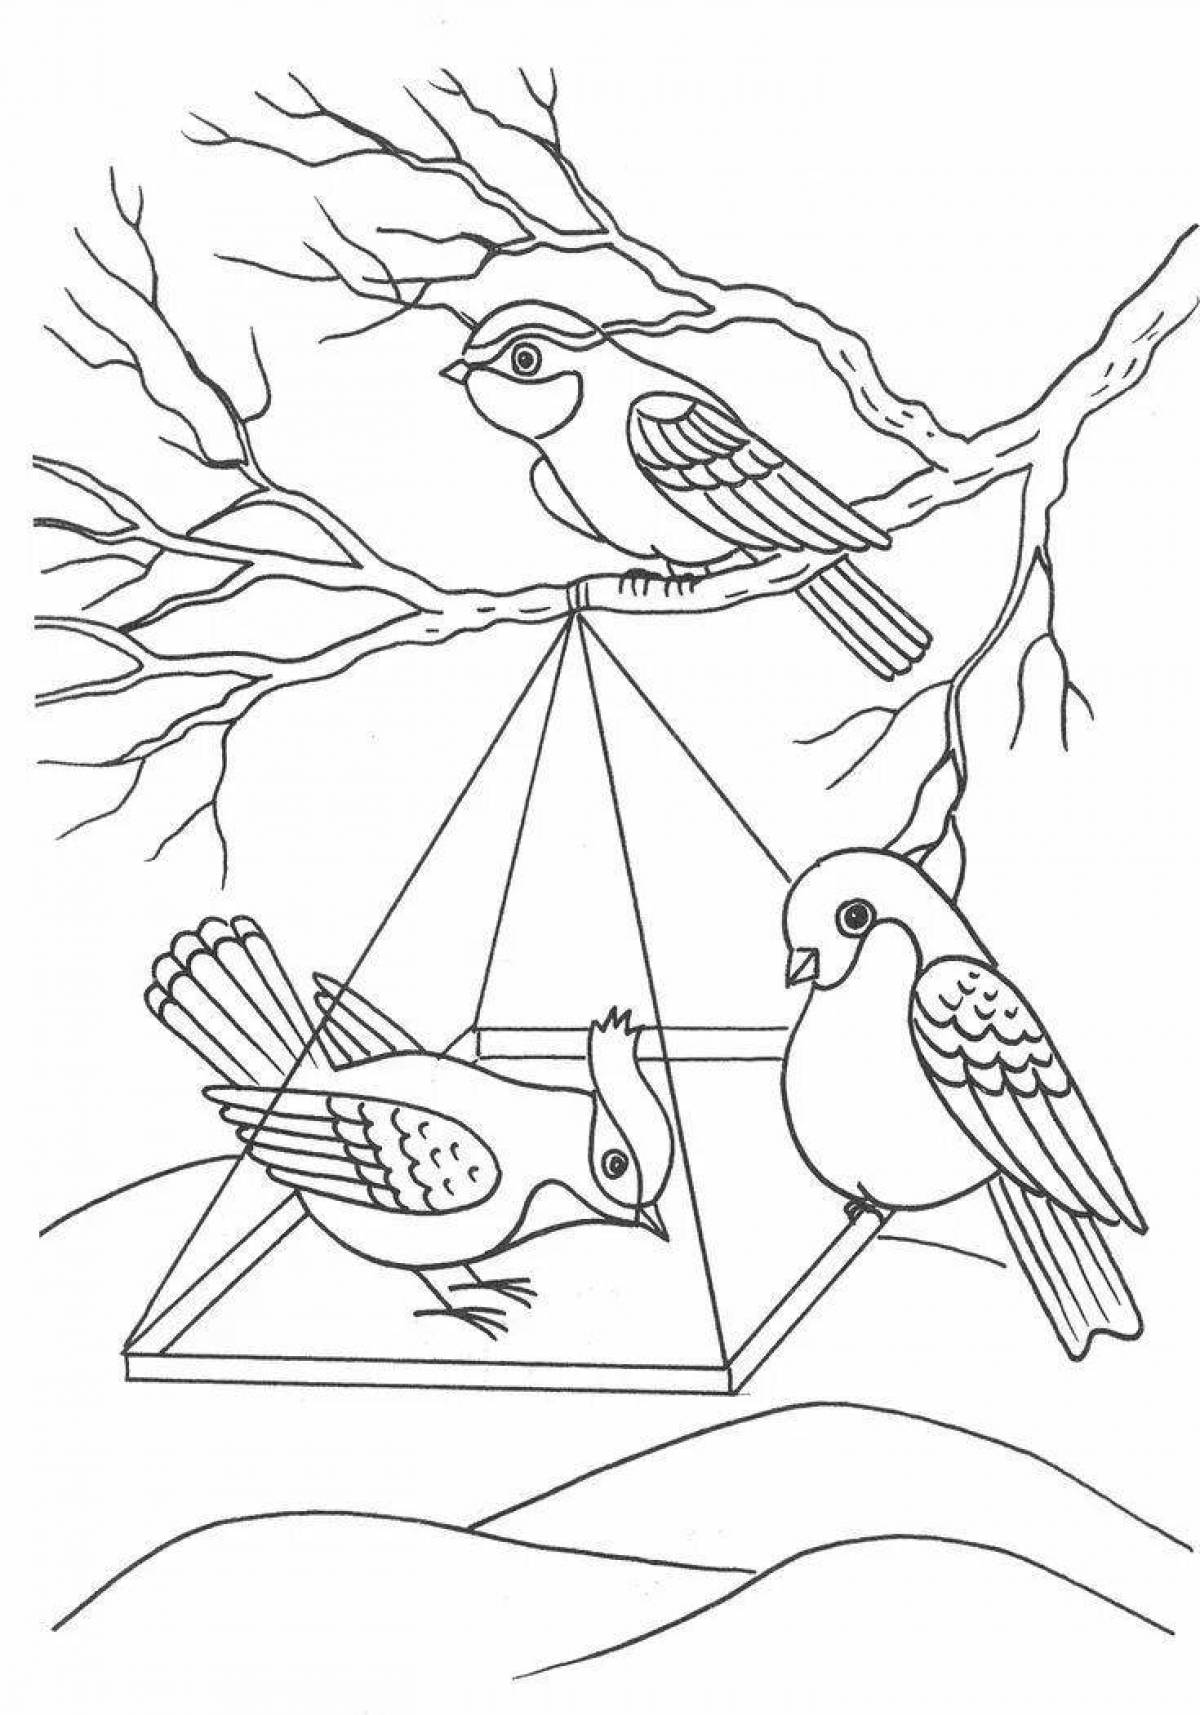 Colorful bird feeder coloring page for kids in winter